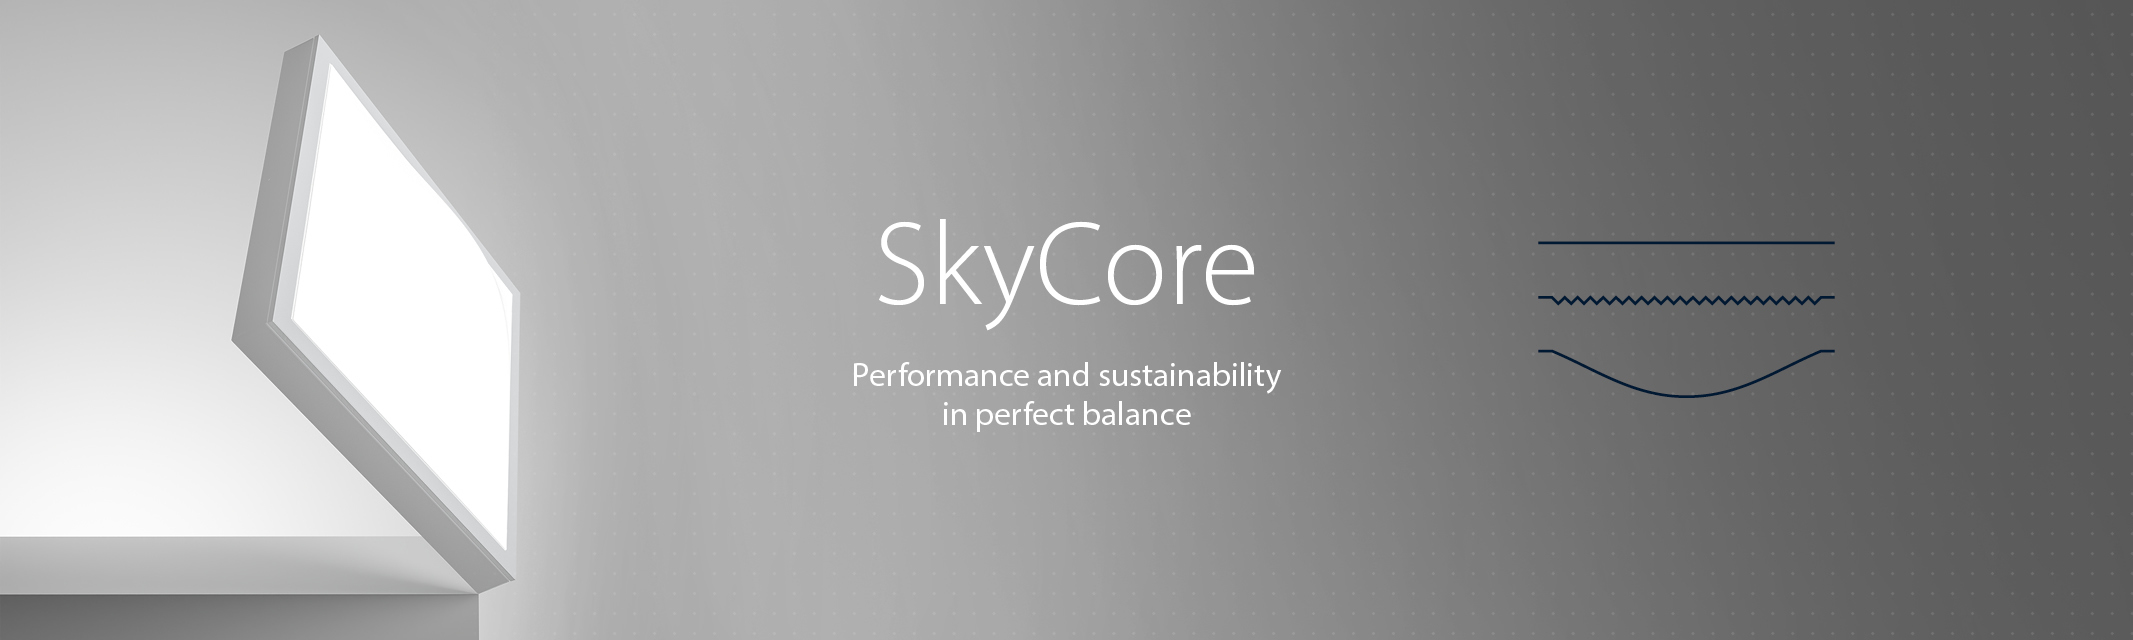 SkyCore - Performance and sustainability in perfect balance